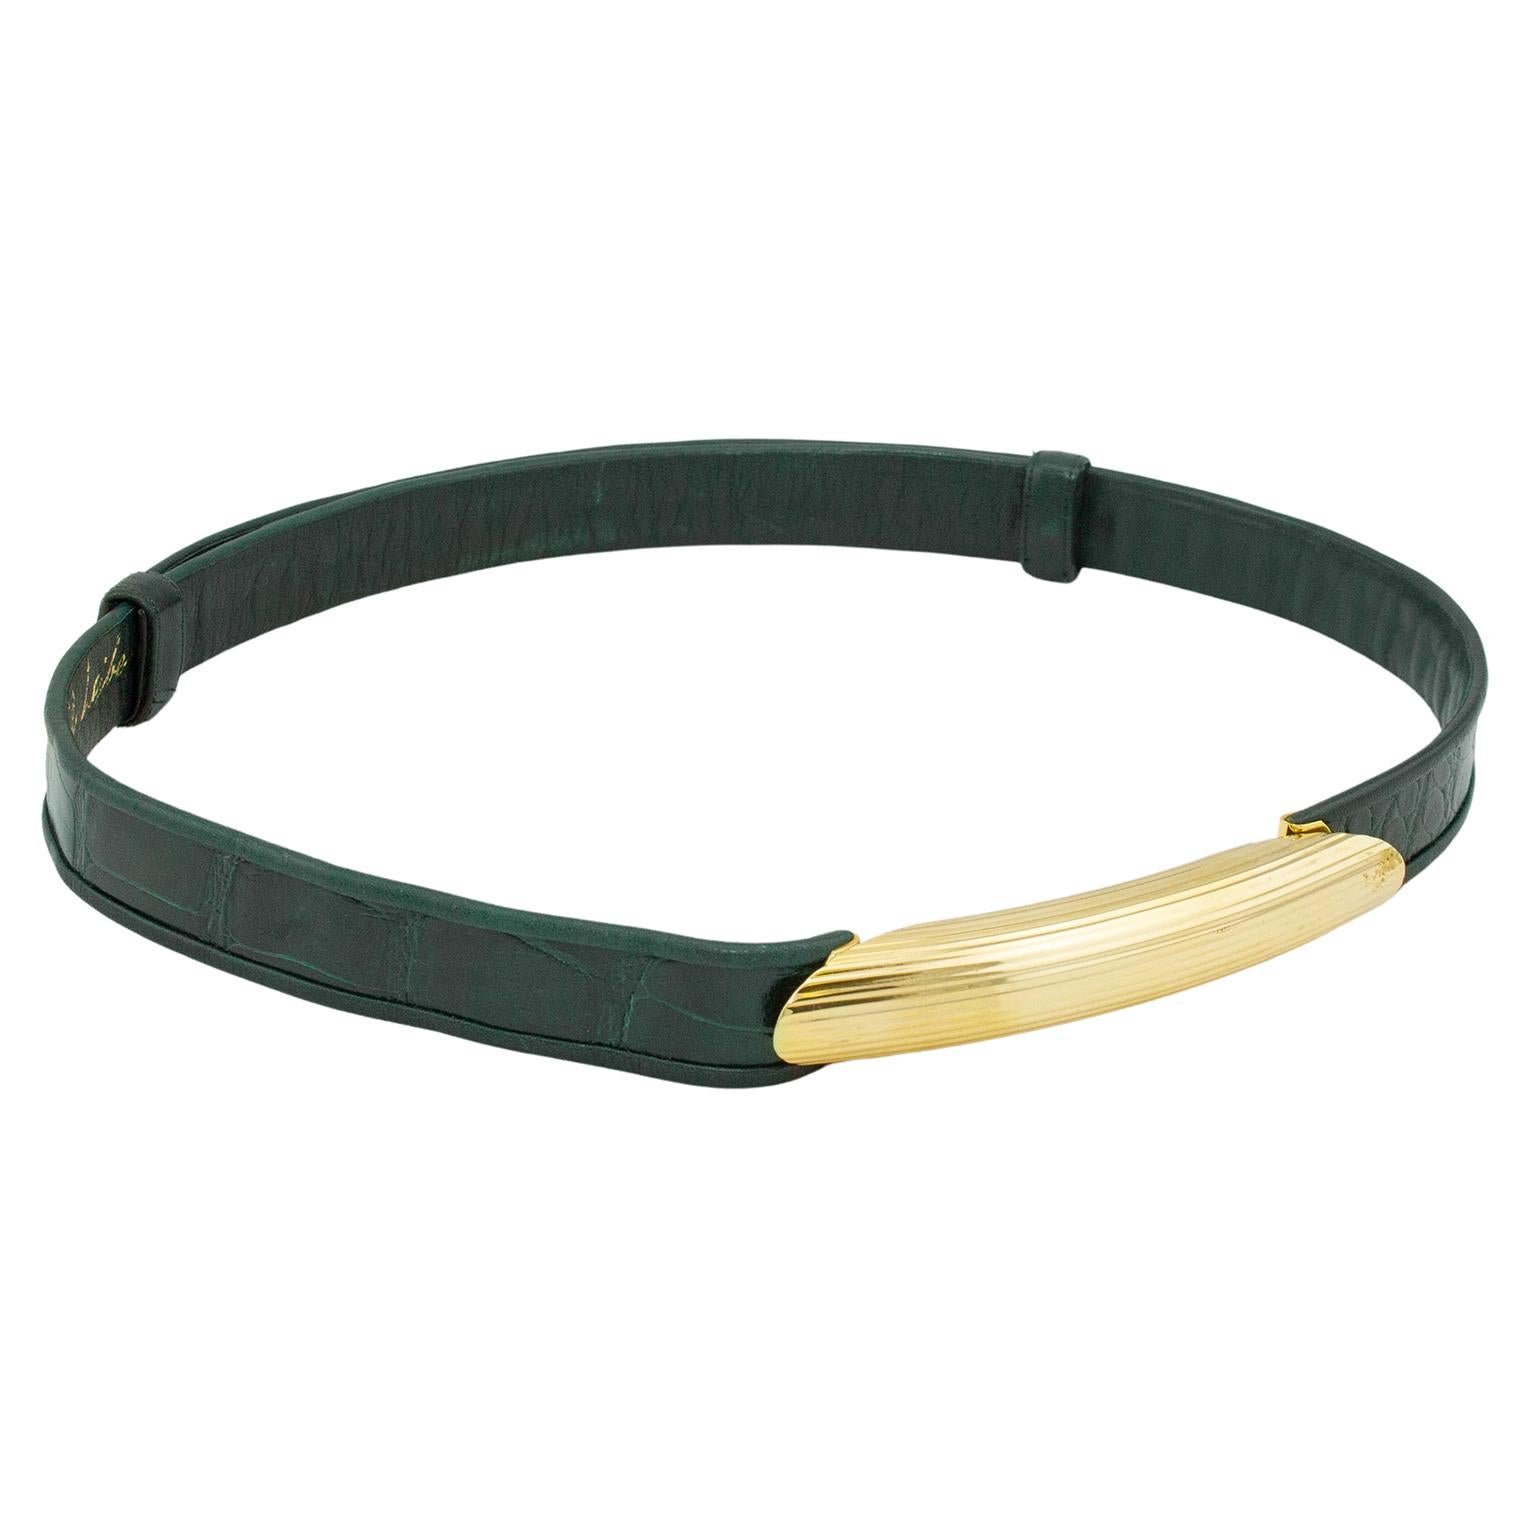 Stunning 1980s Judith Leiber hunter green patterned leather thin belt. Gold tone ribbed metal tubular buckle detail. Buckle closure is metal hook and eye. Green leather interior with gold brand stamp. Adjustable - 40